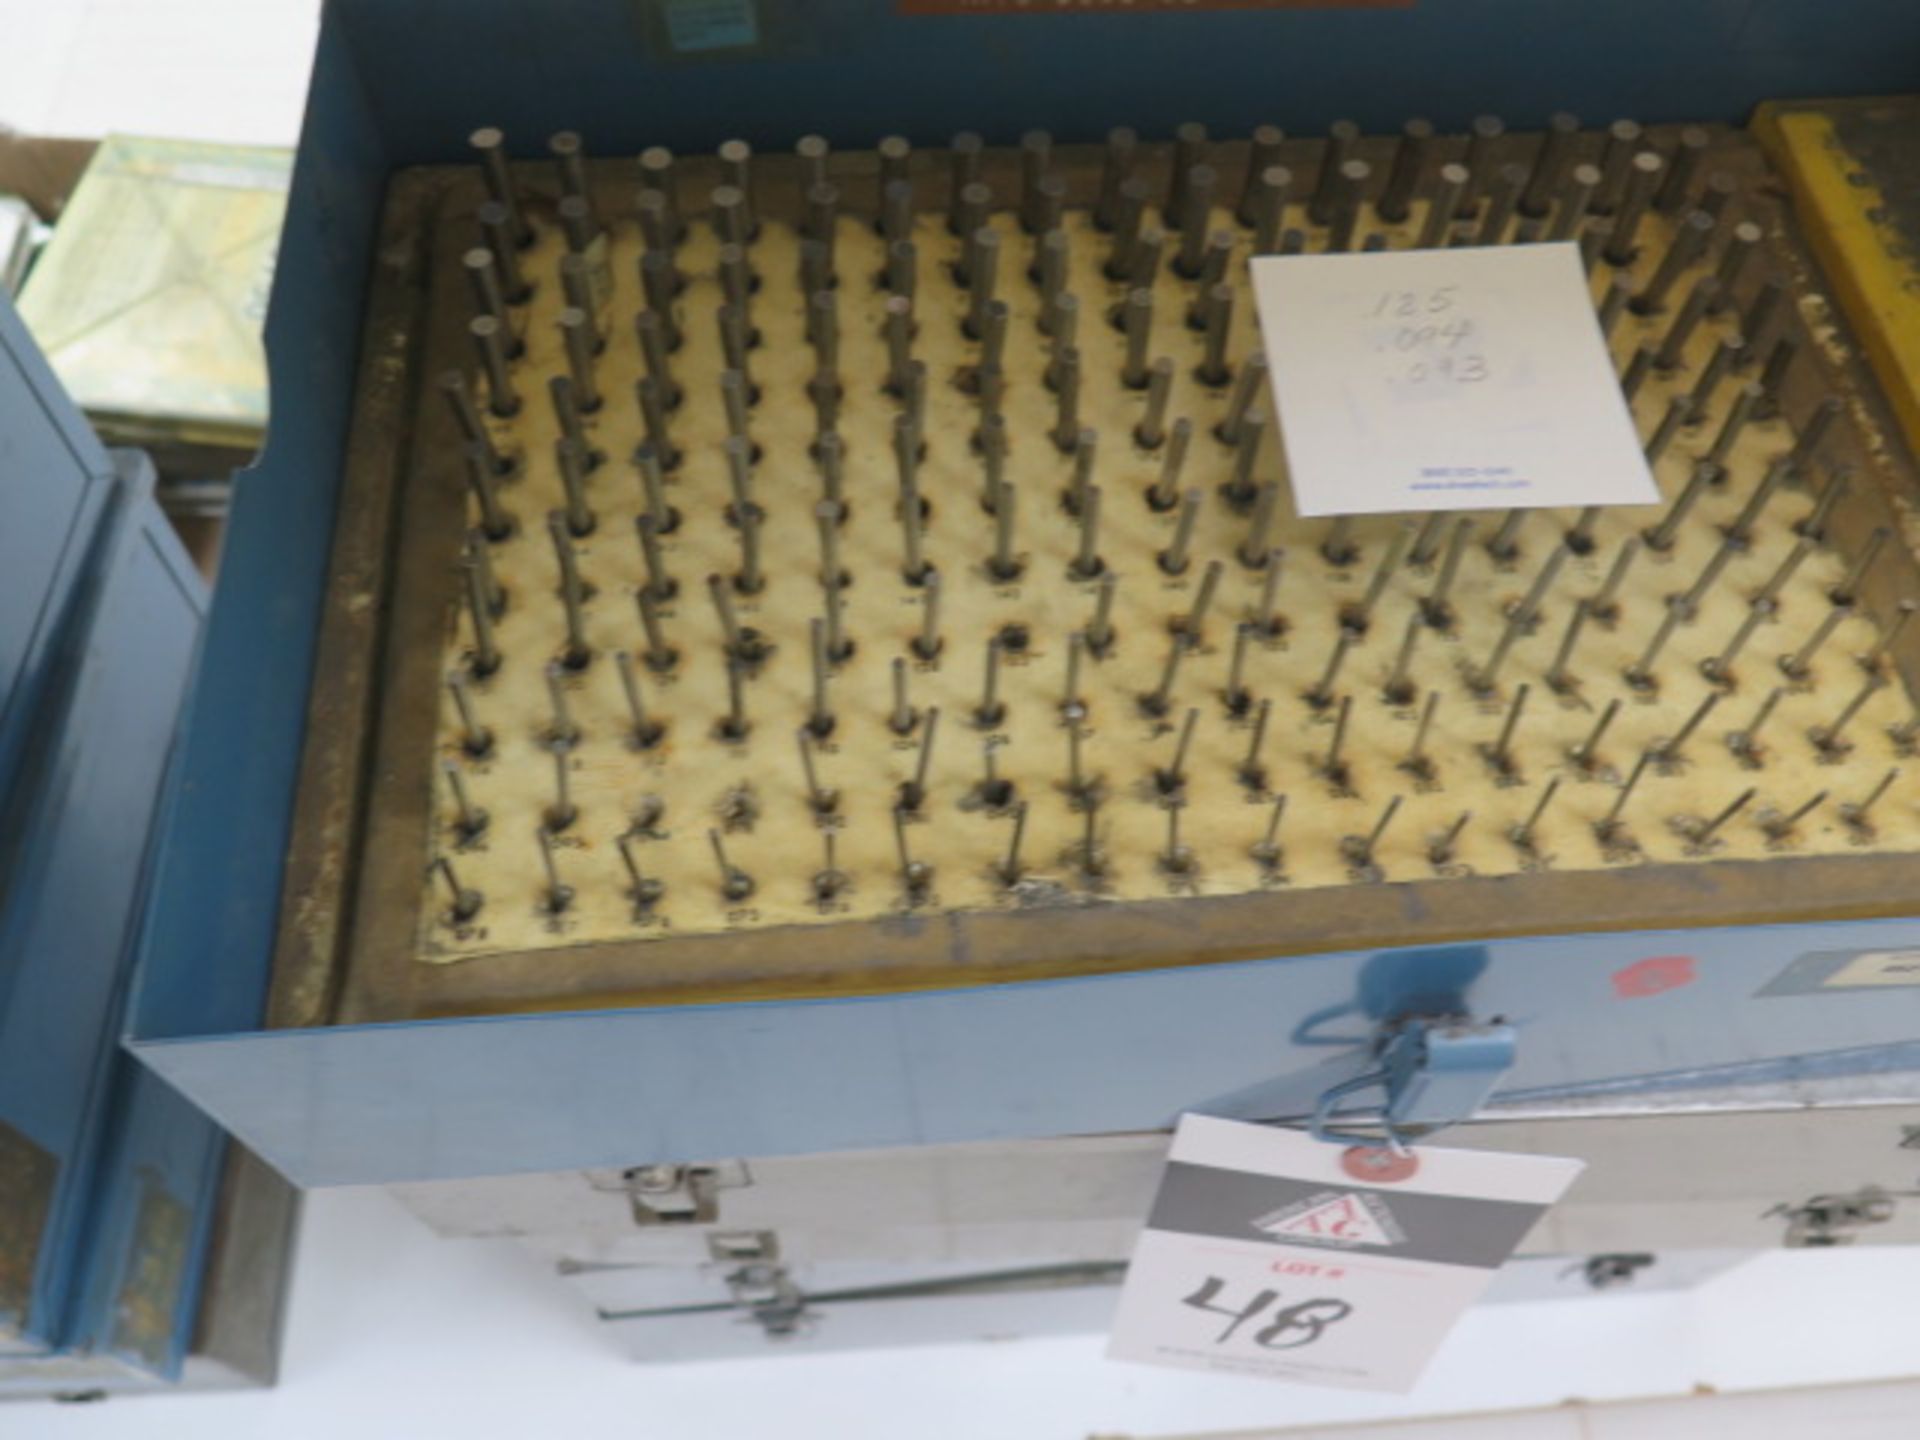 Pin Gage Sets (5) (SOLD AS-IS - NO WARRANTY) - Image 2 of 2